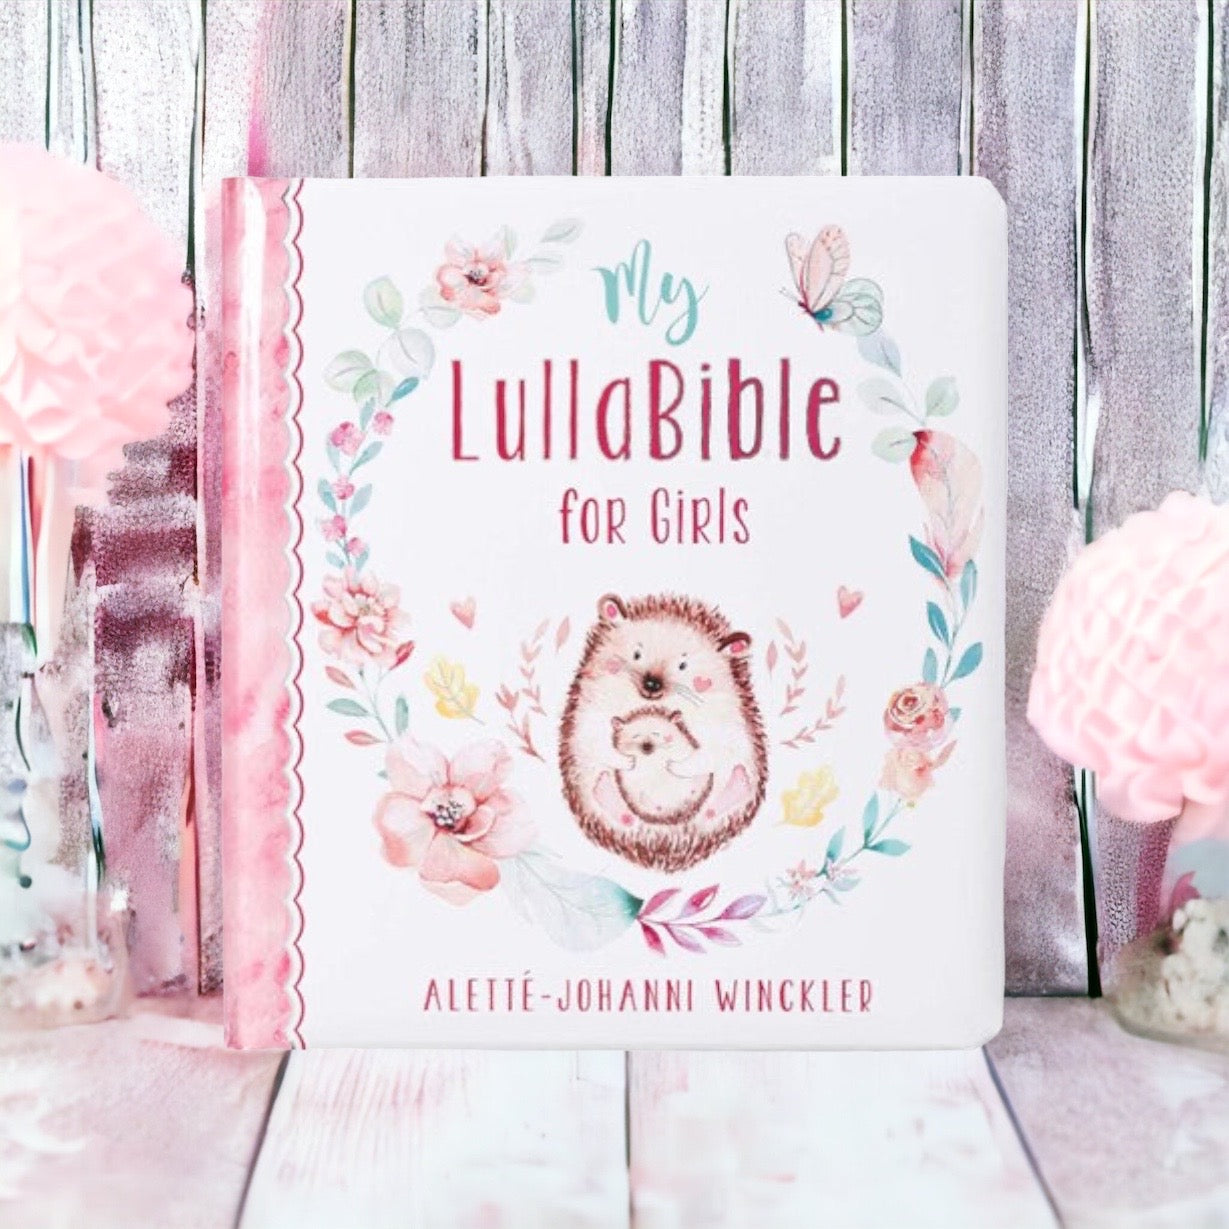 My LullaBible Story Book for Girls